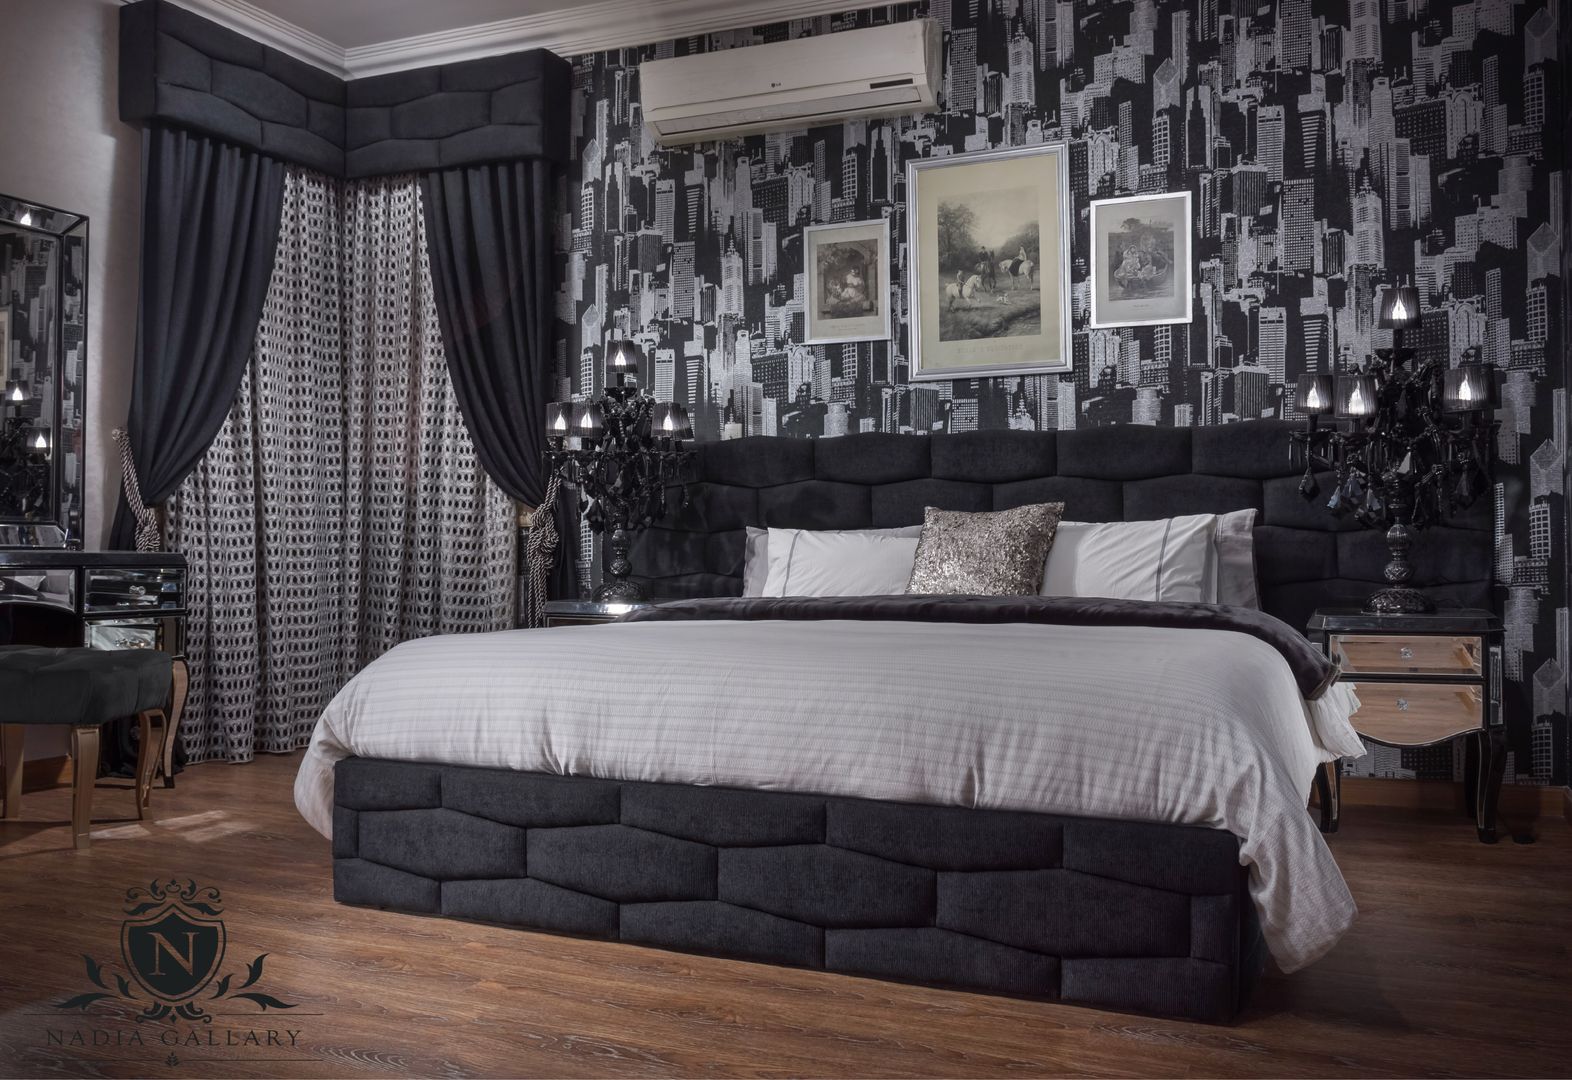 Ultra modern luxury bedroom Never be scared of black, NADIA .Gallery NADIA .Gallery Bedroom لکڑی Wood effect Beds & headboards